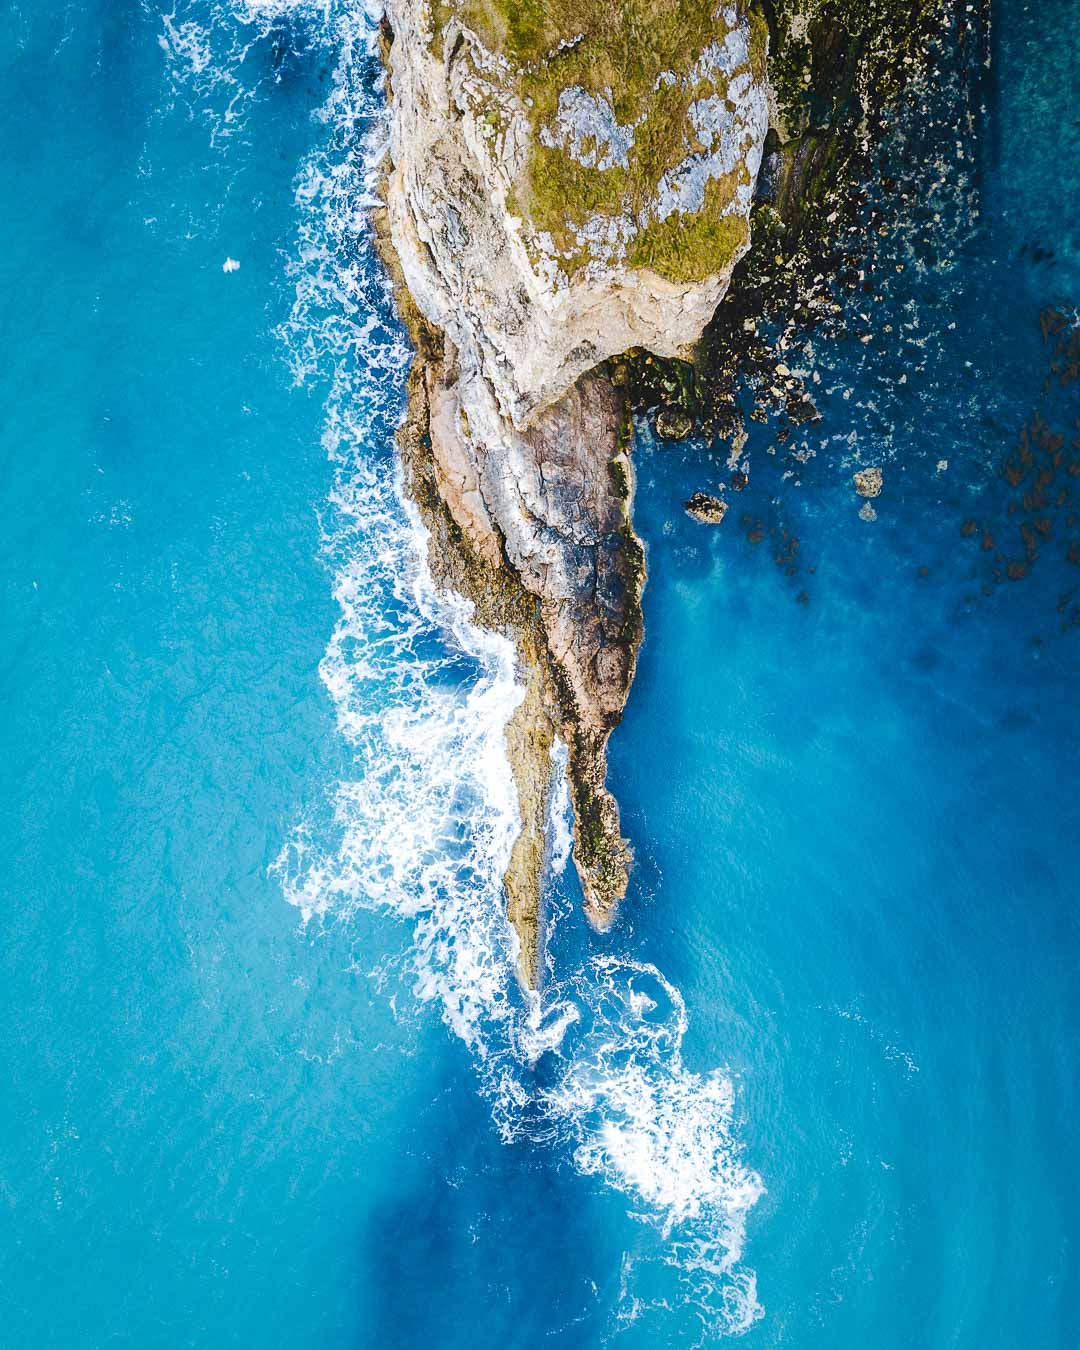 right side cliffs of lulworth cove from above